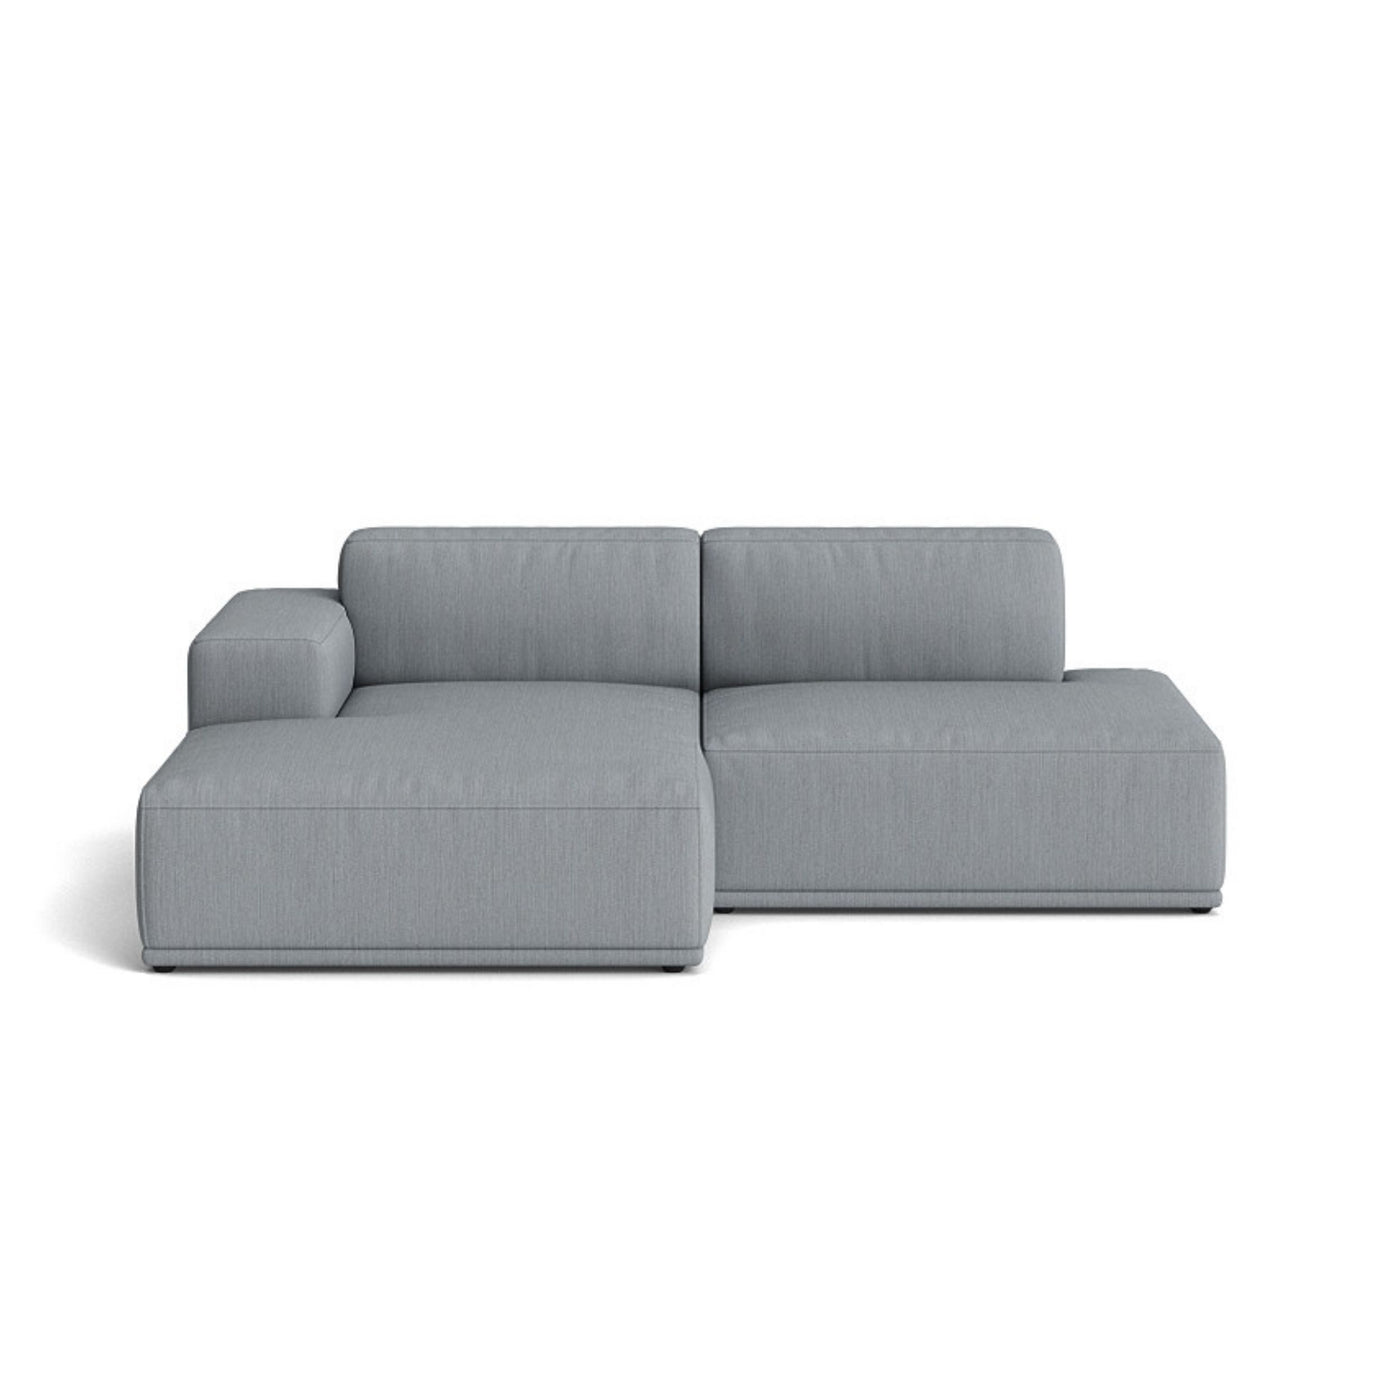 Muuto Connect Soft Modular 2 Seater Sofa, configuration 3. made-to-order from someday designs. #colour_balder-1775